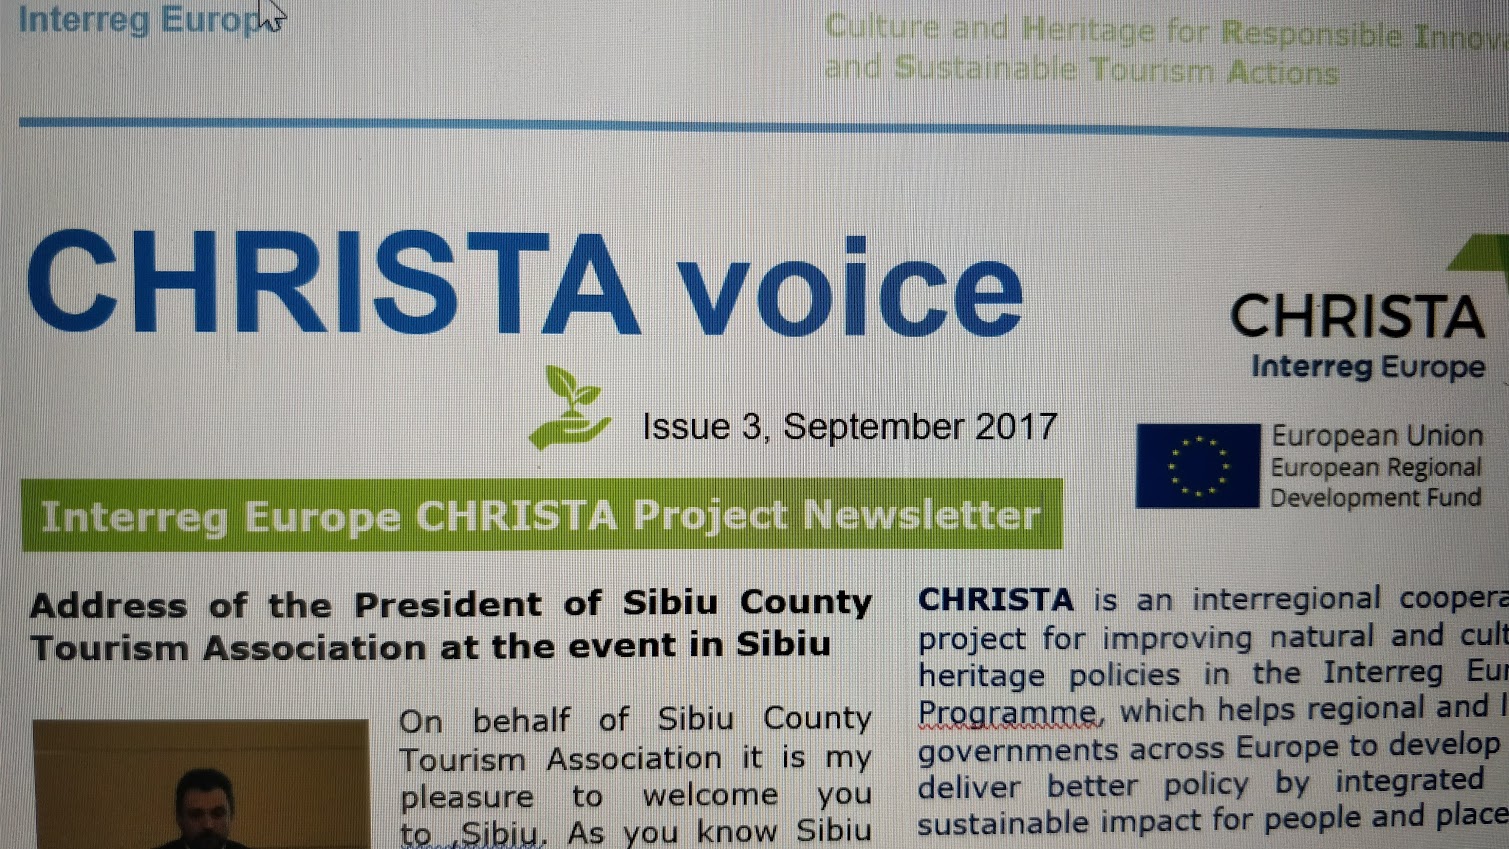 Newsletter No 3 CHRISTA voice published